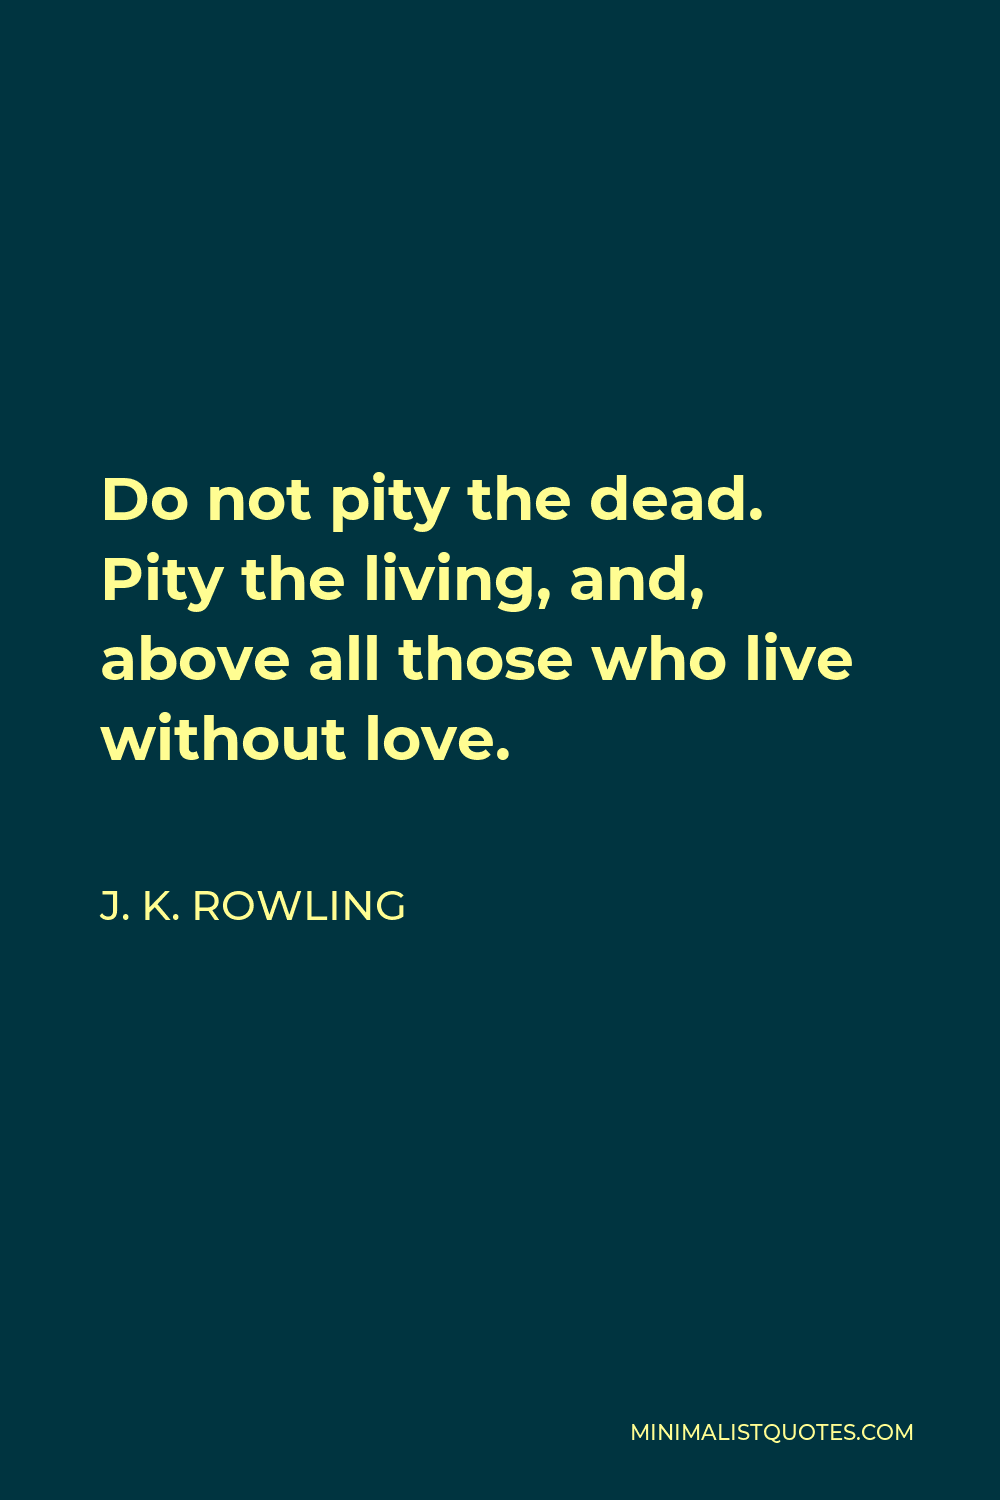 J. K. Rowling Quote - Do not pity the dead. Pity the living, and, above all those who live without love.